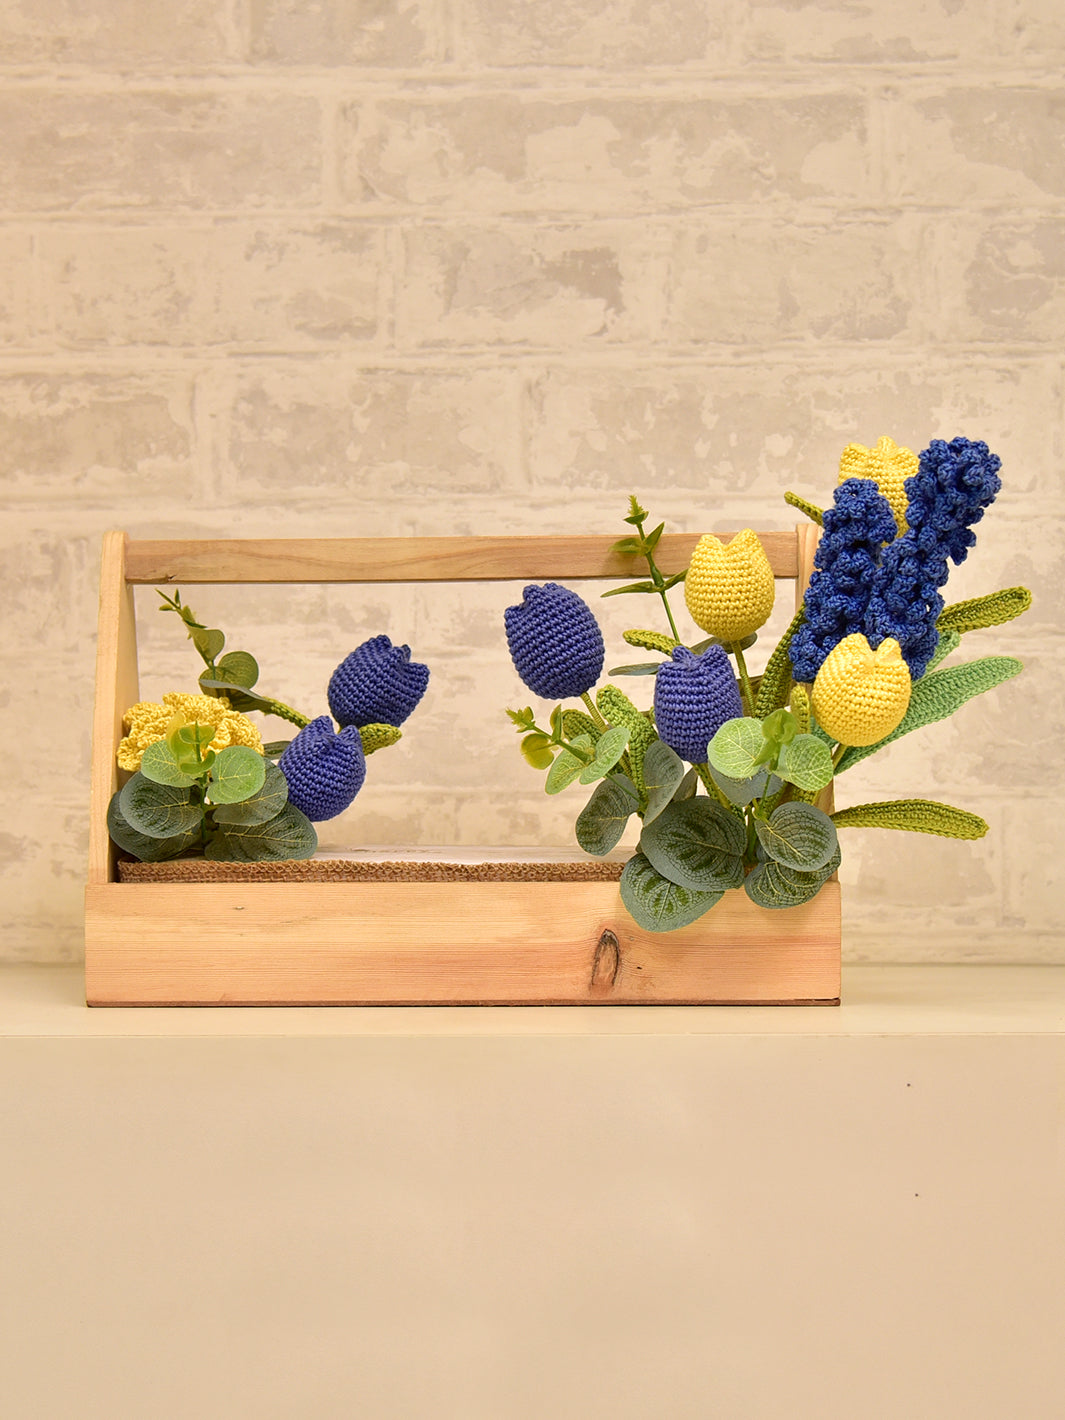 Blue & Yellow Tulips with Hyacinth Crochet Flowers | Artisan Floral Arrangement